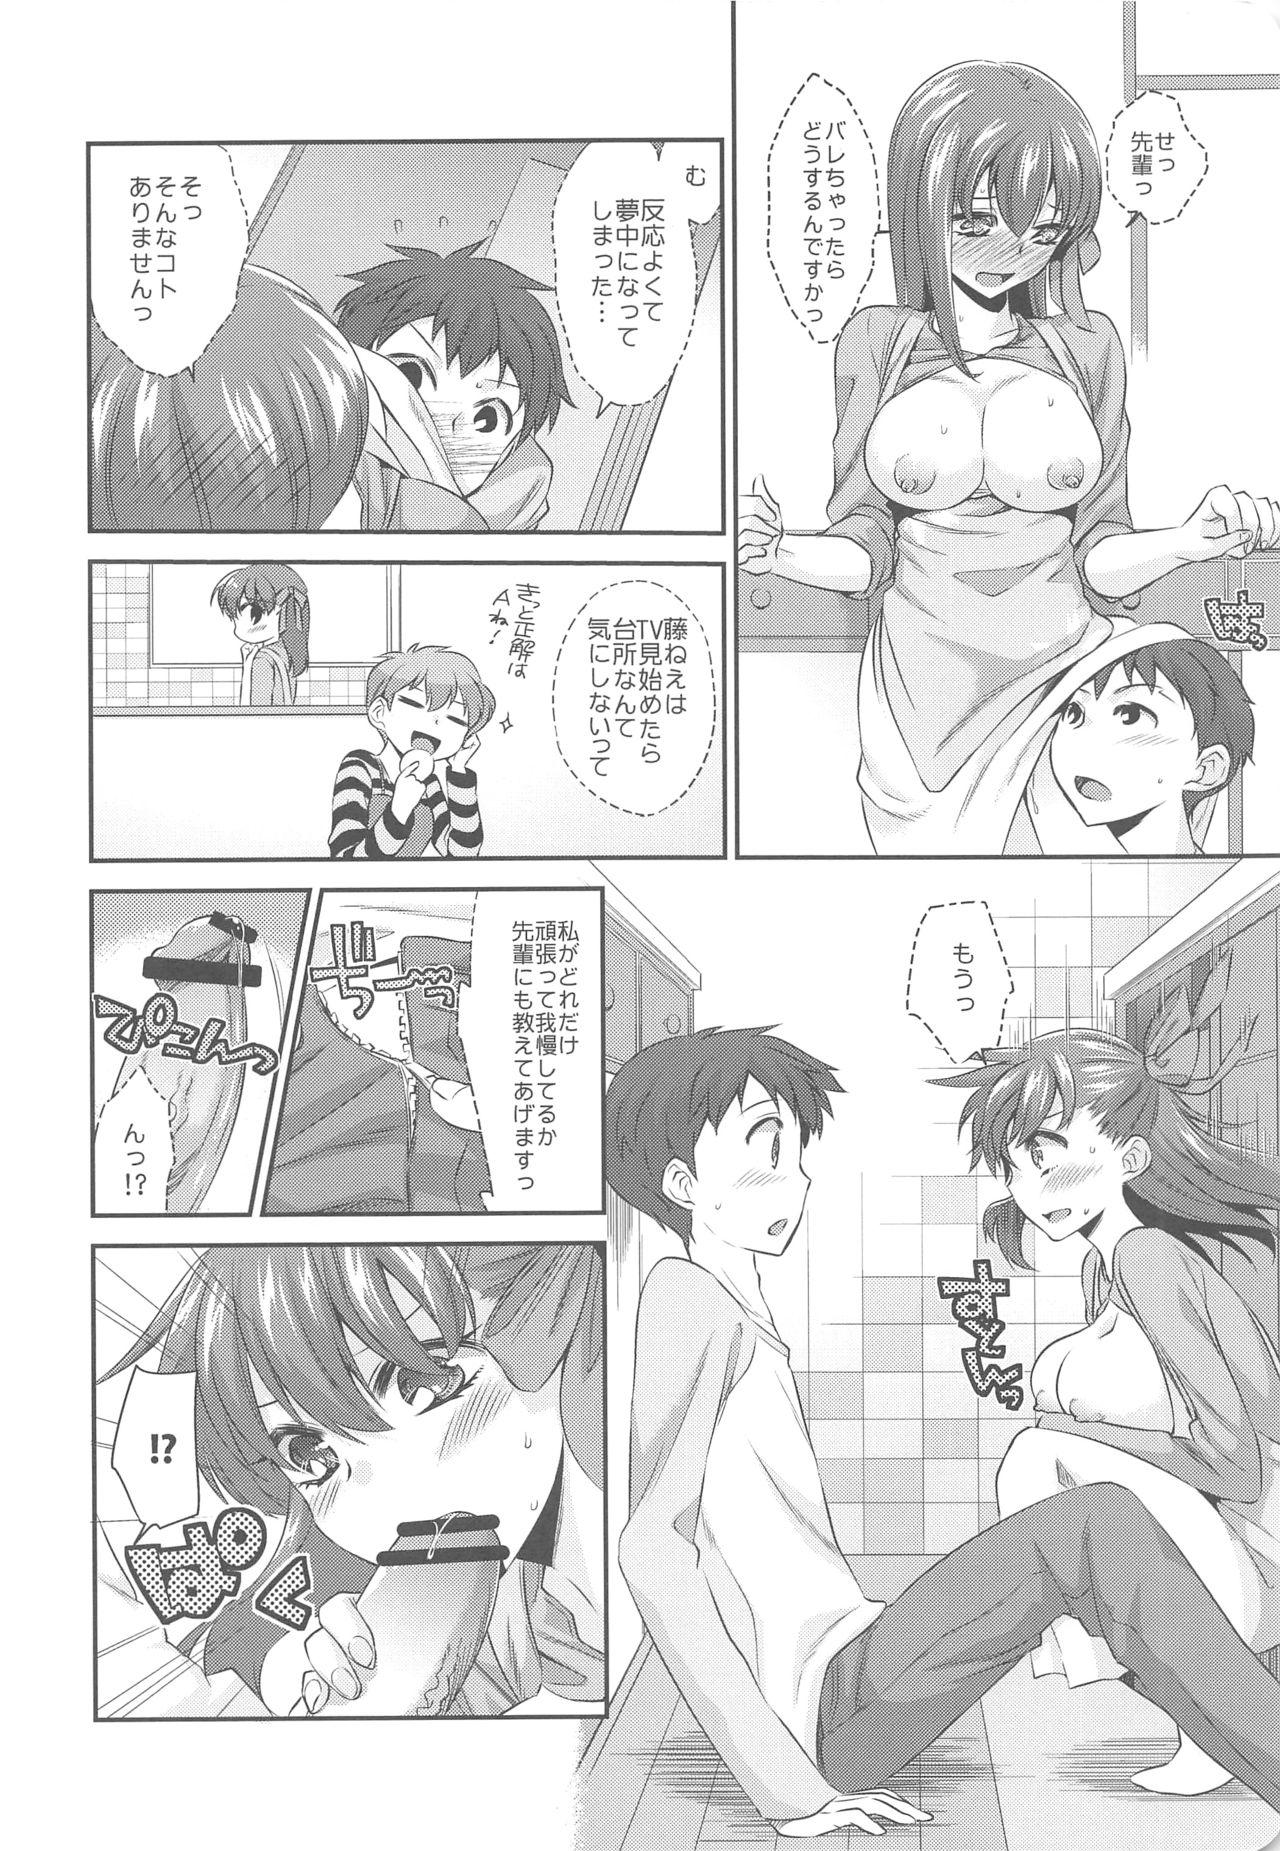 American Kitchen H - Fate stay night Big Boobs - Page 6